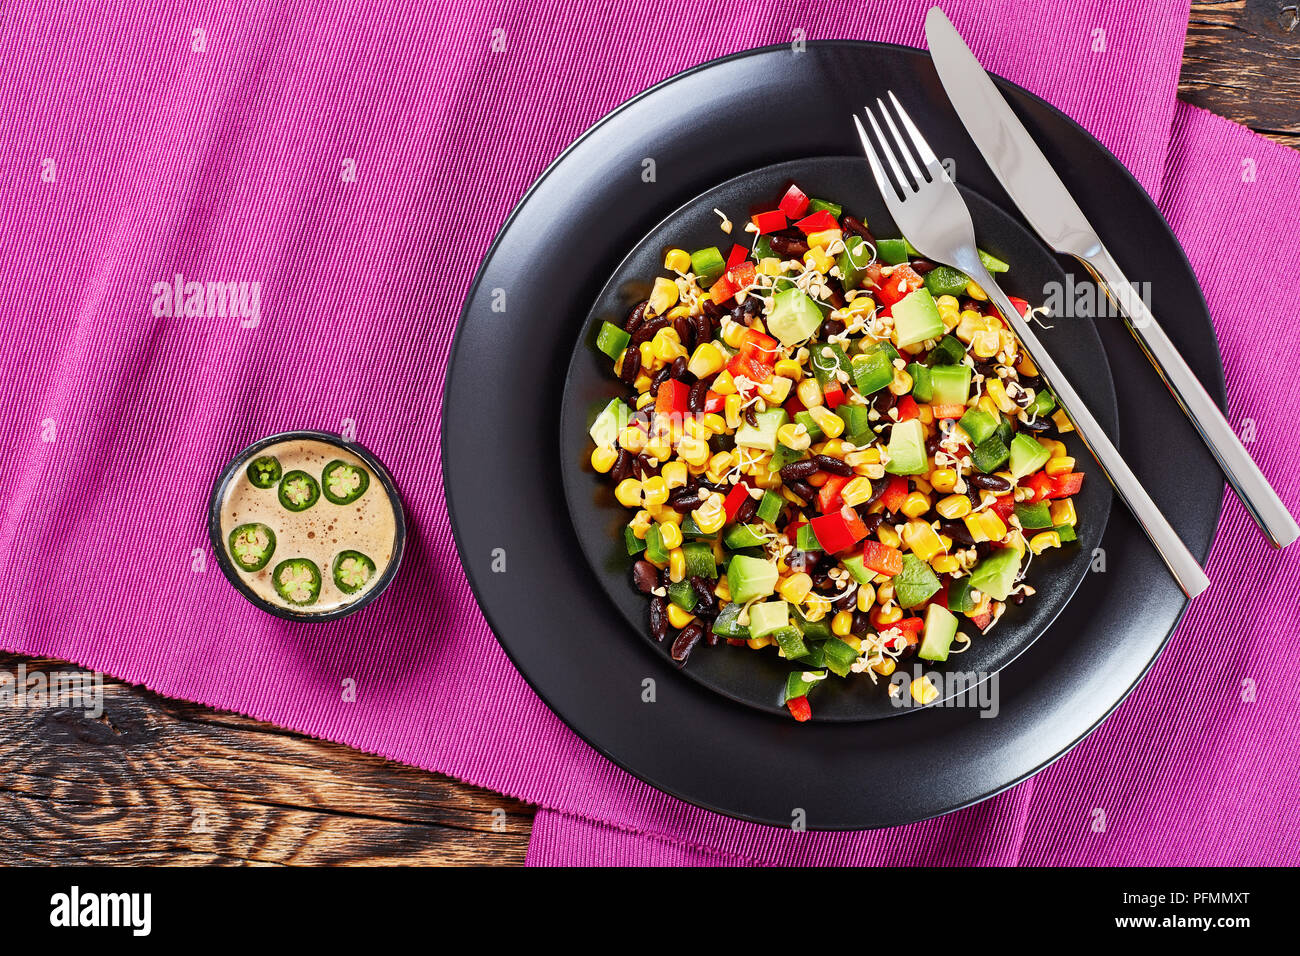 mexican style salad with avocado, black beans, canned corn, buckwheat sprouts, diced red and green pepper served on black plates with silver fork and  Stock Photo